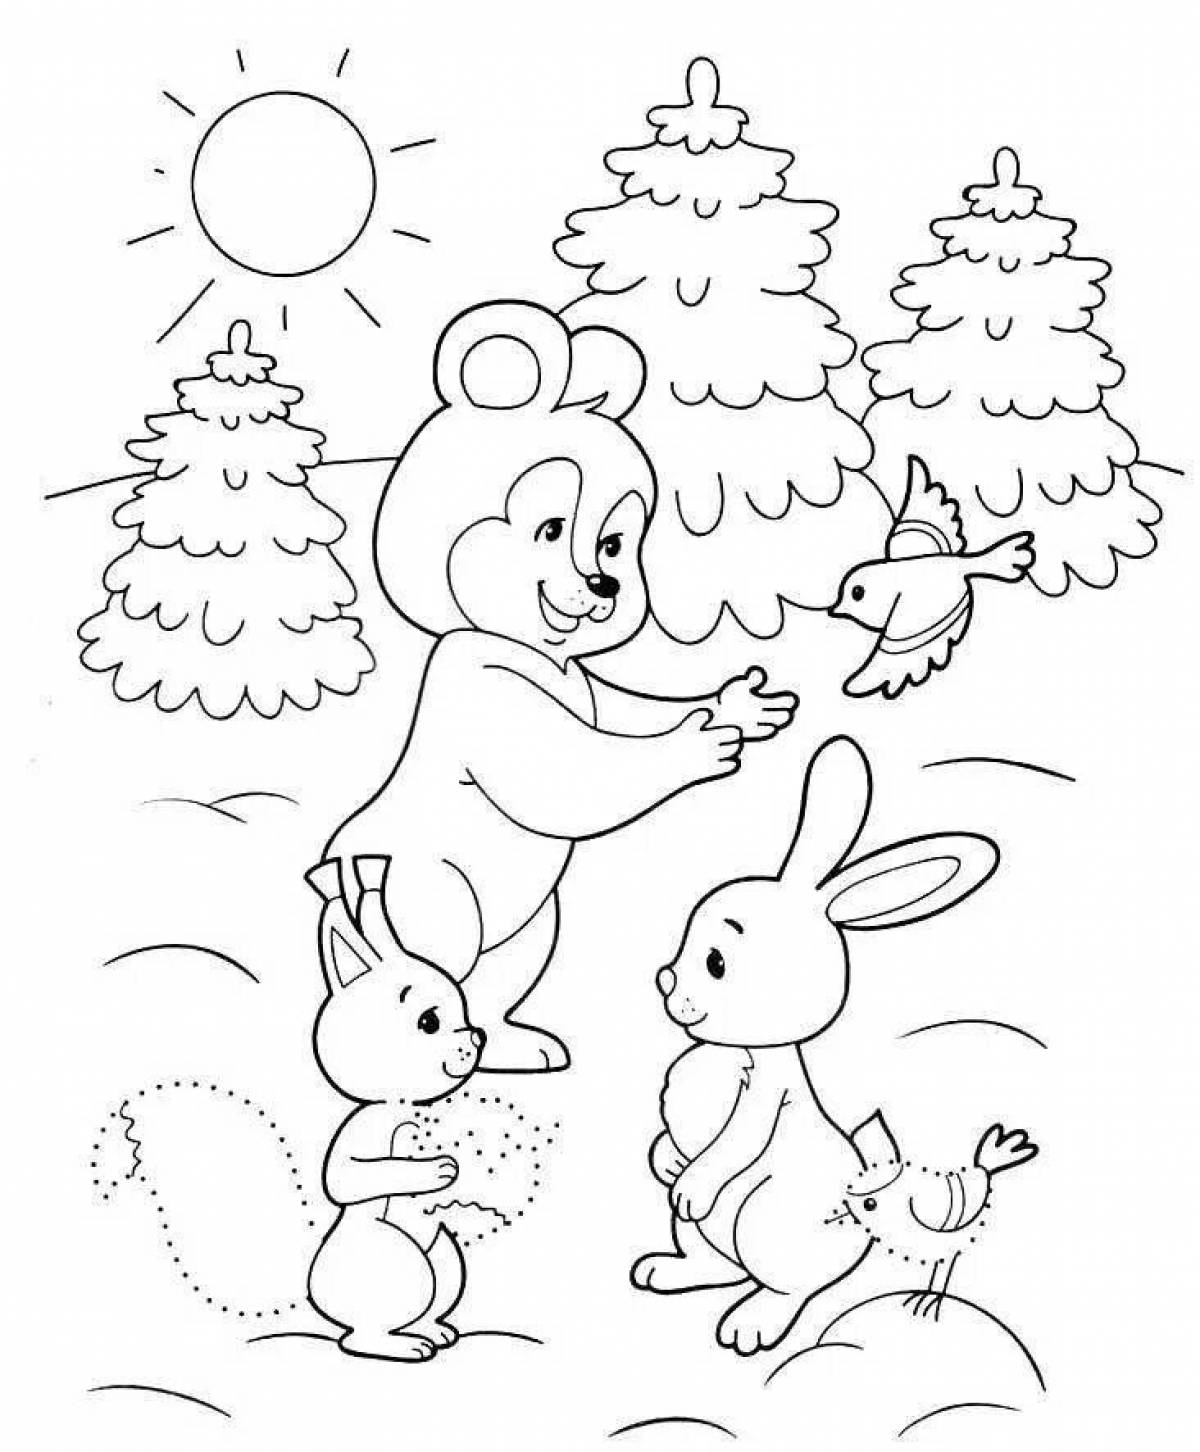 Colouring funny animals in the winter forest